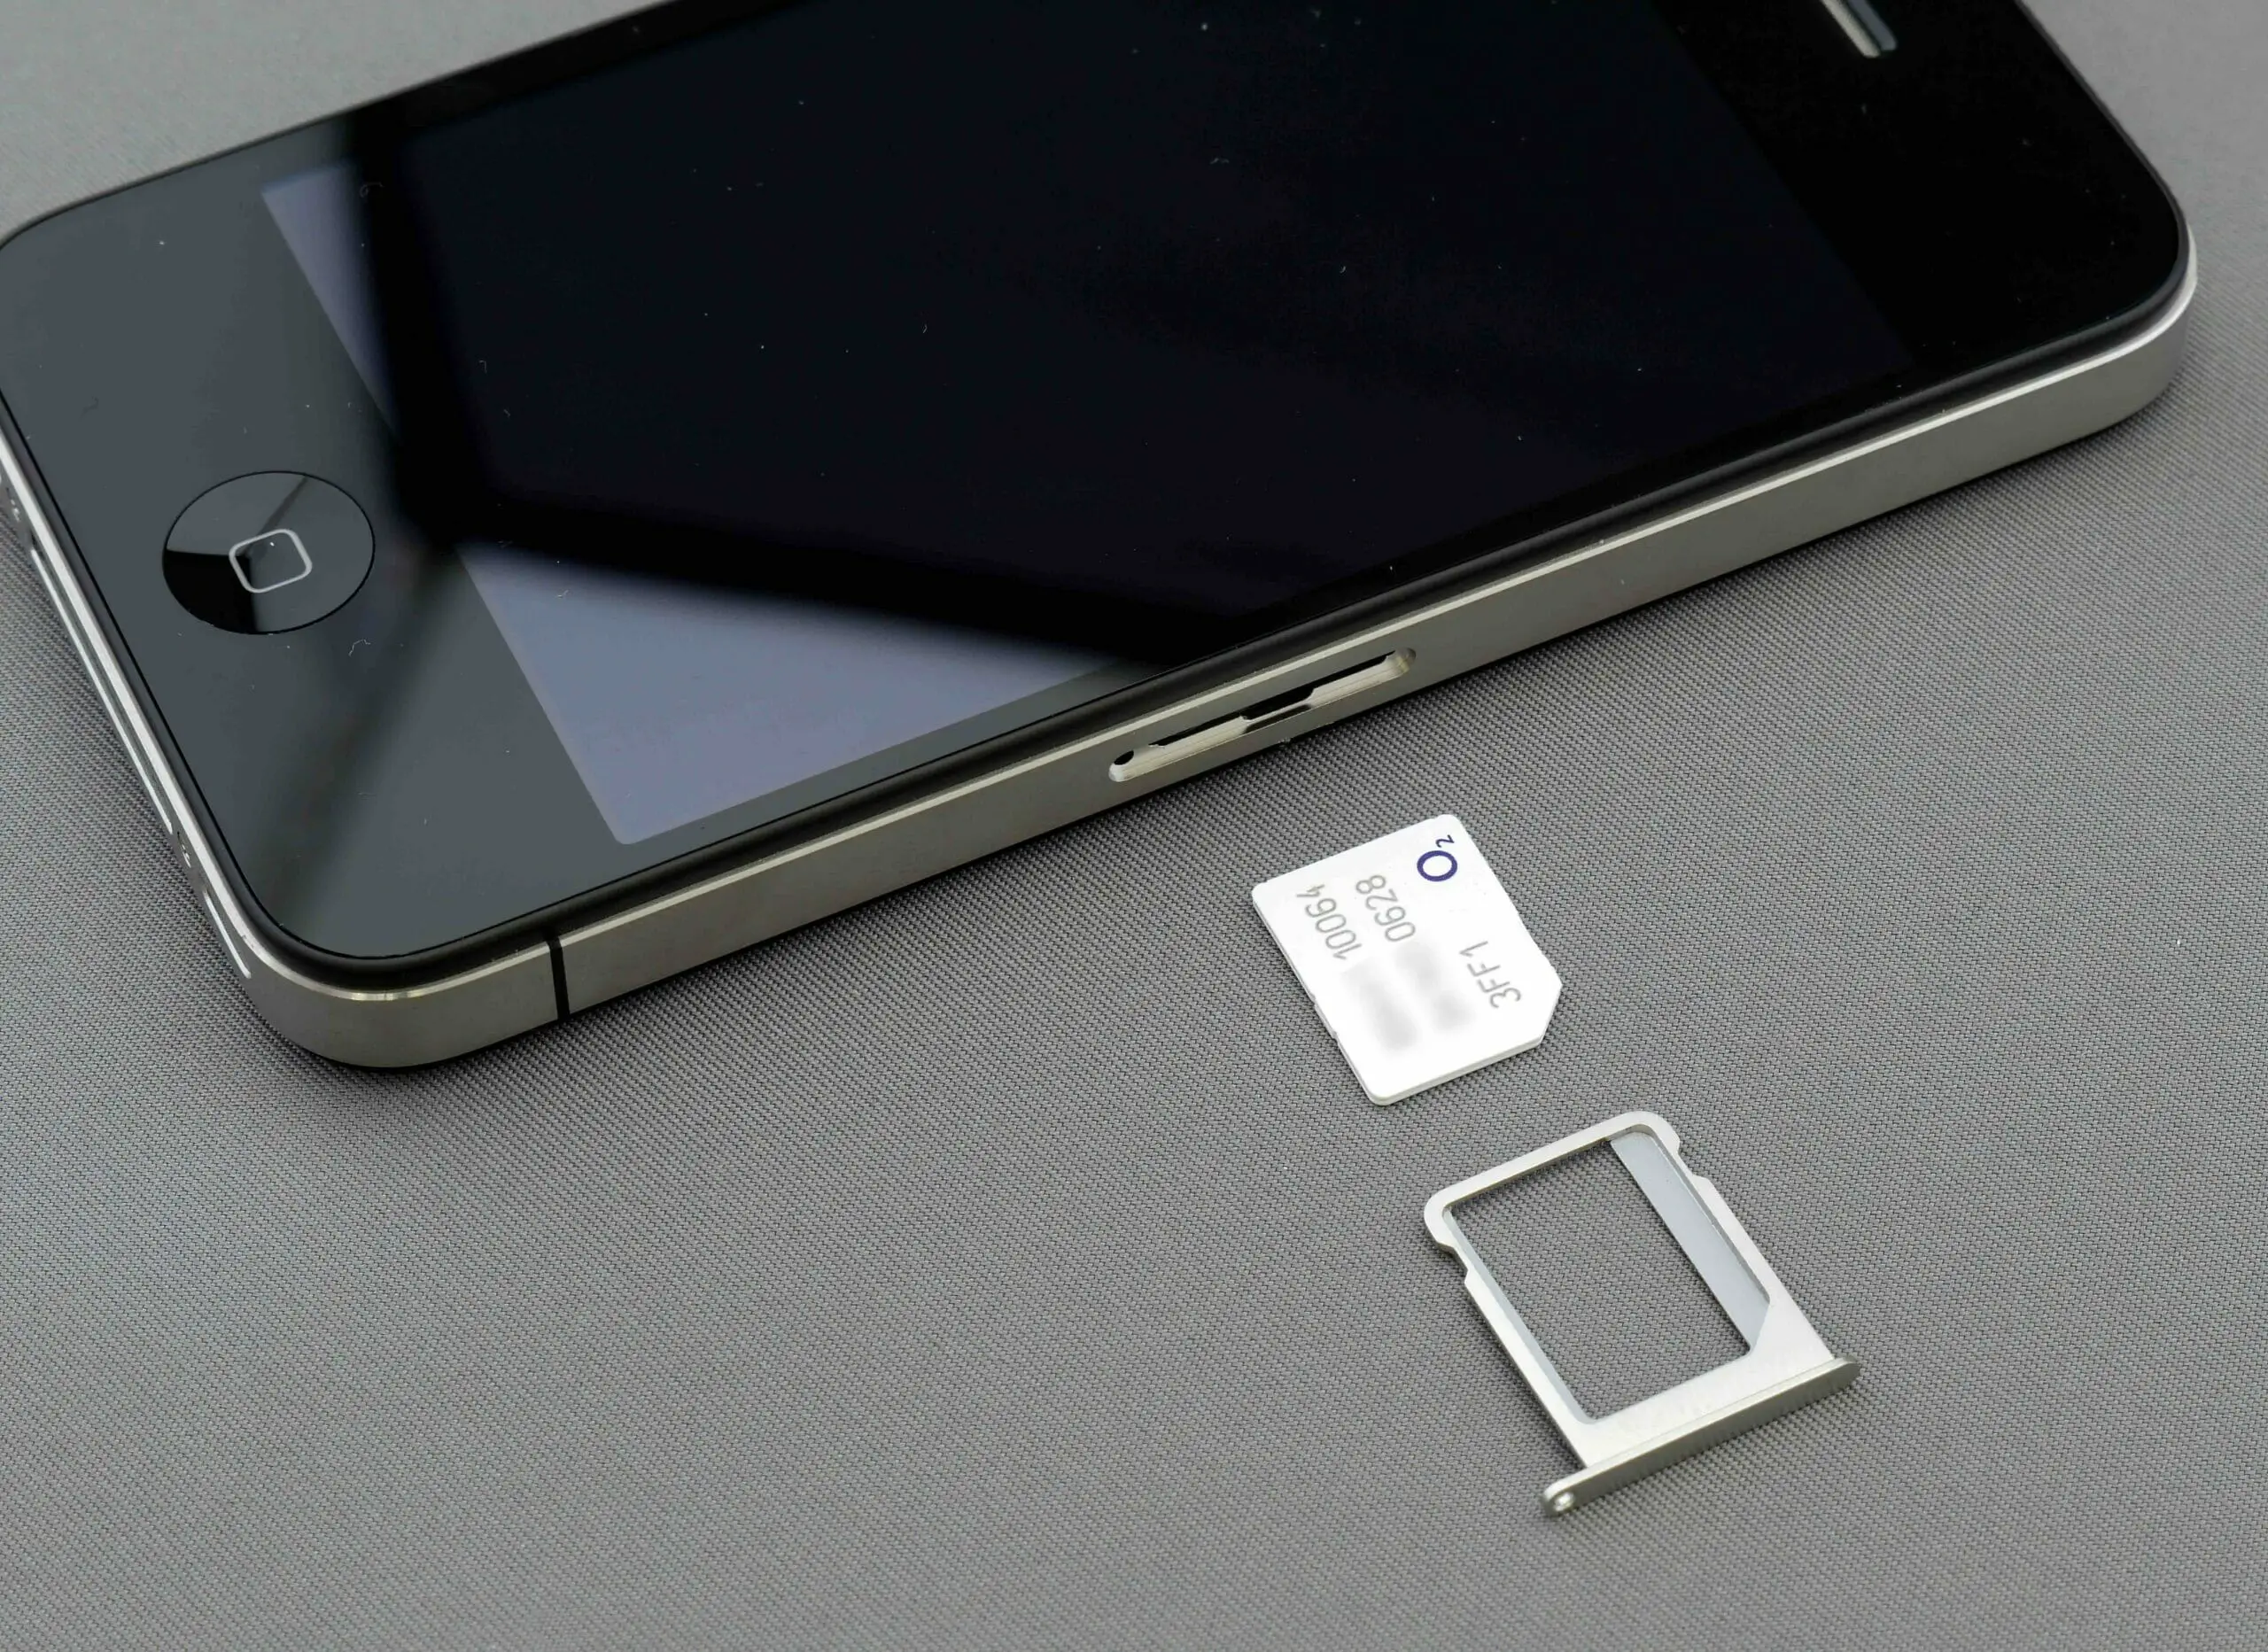 A phone, sim card and its sim card holder on the table